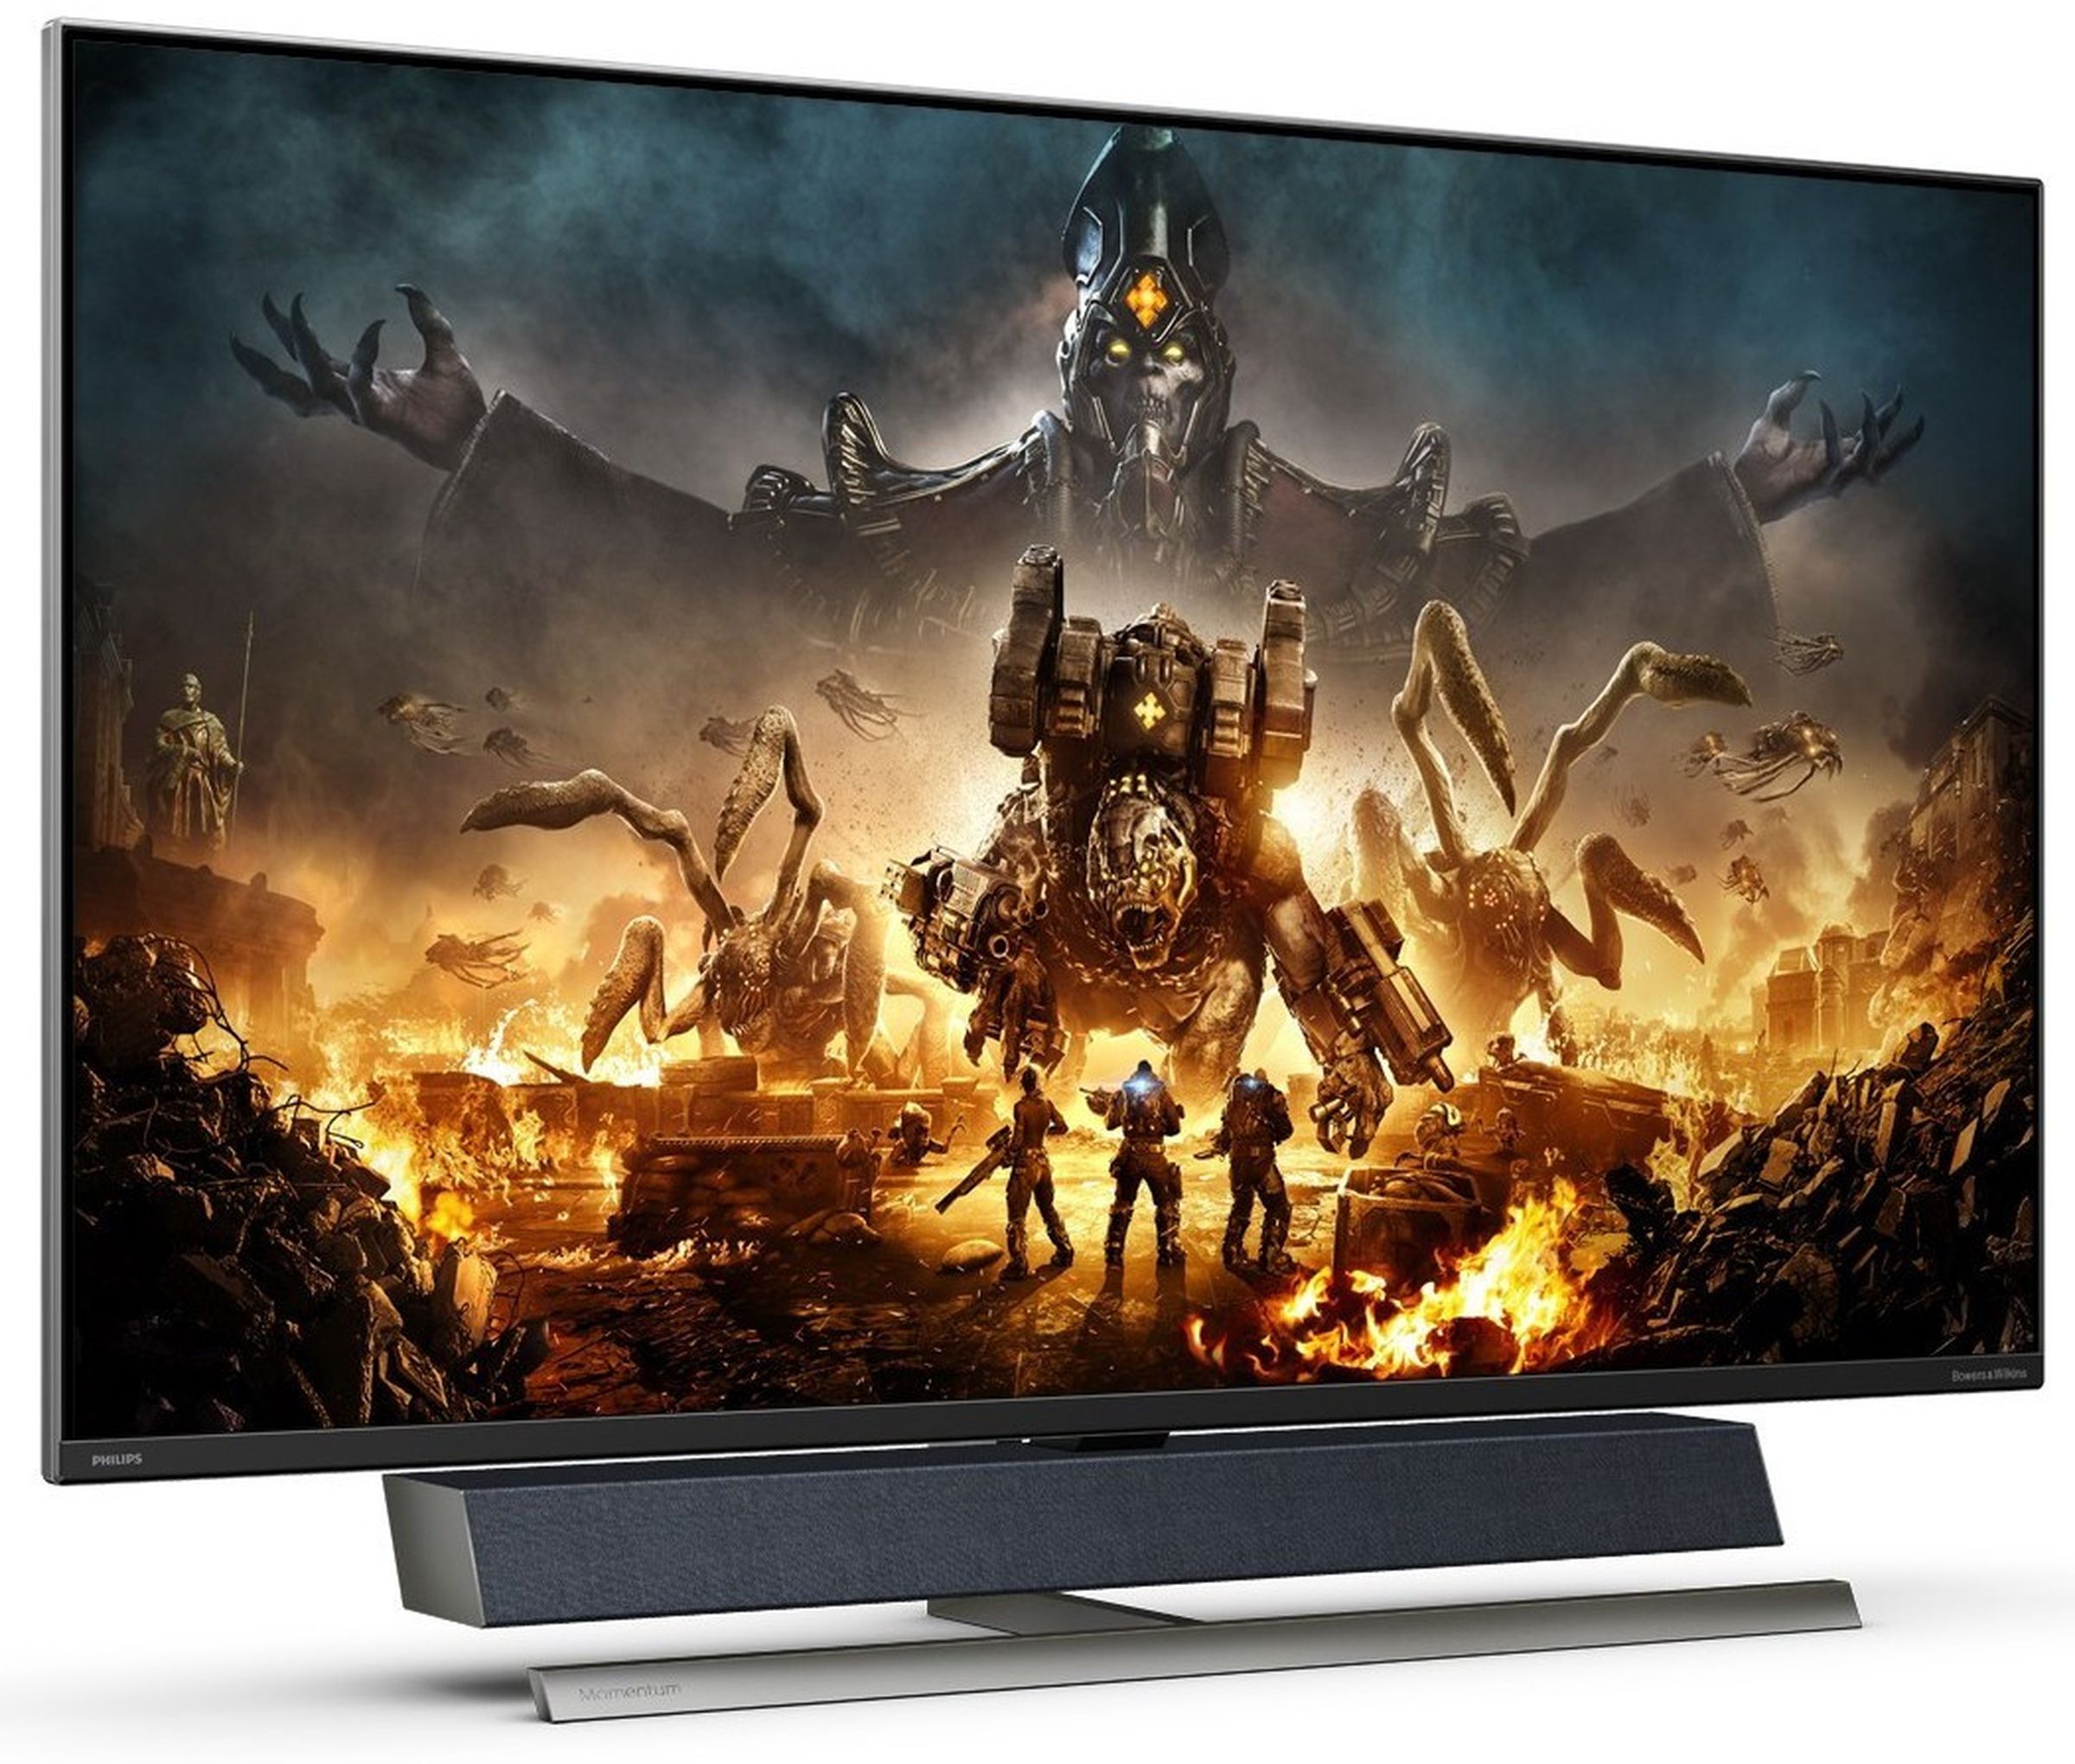 The 55-inch Philips Momentum is one of the first displays to include Microsoft’s new Xbox badge.